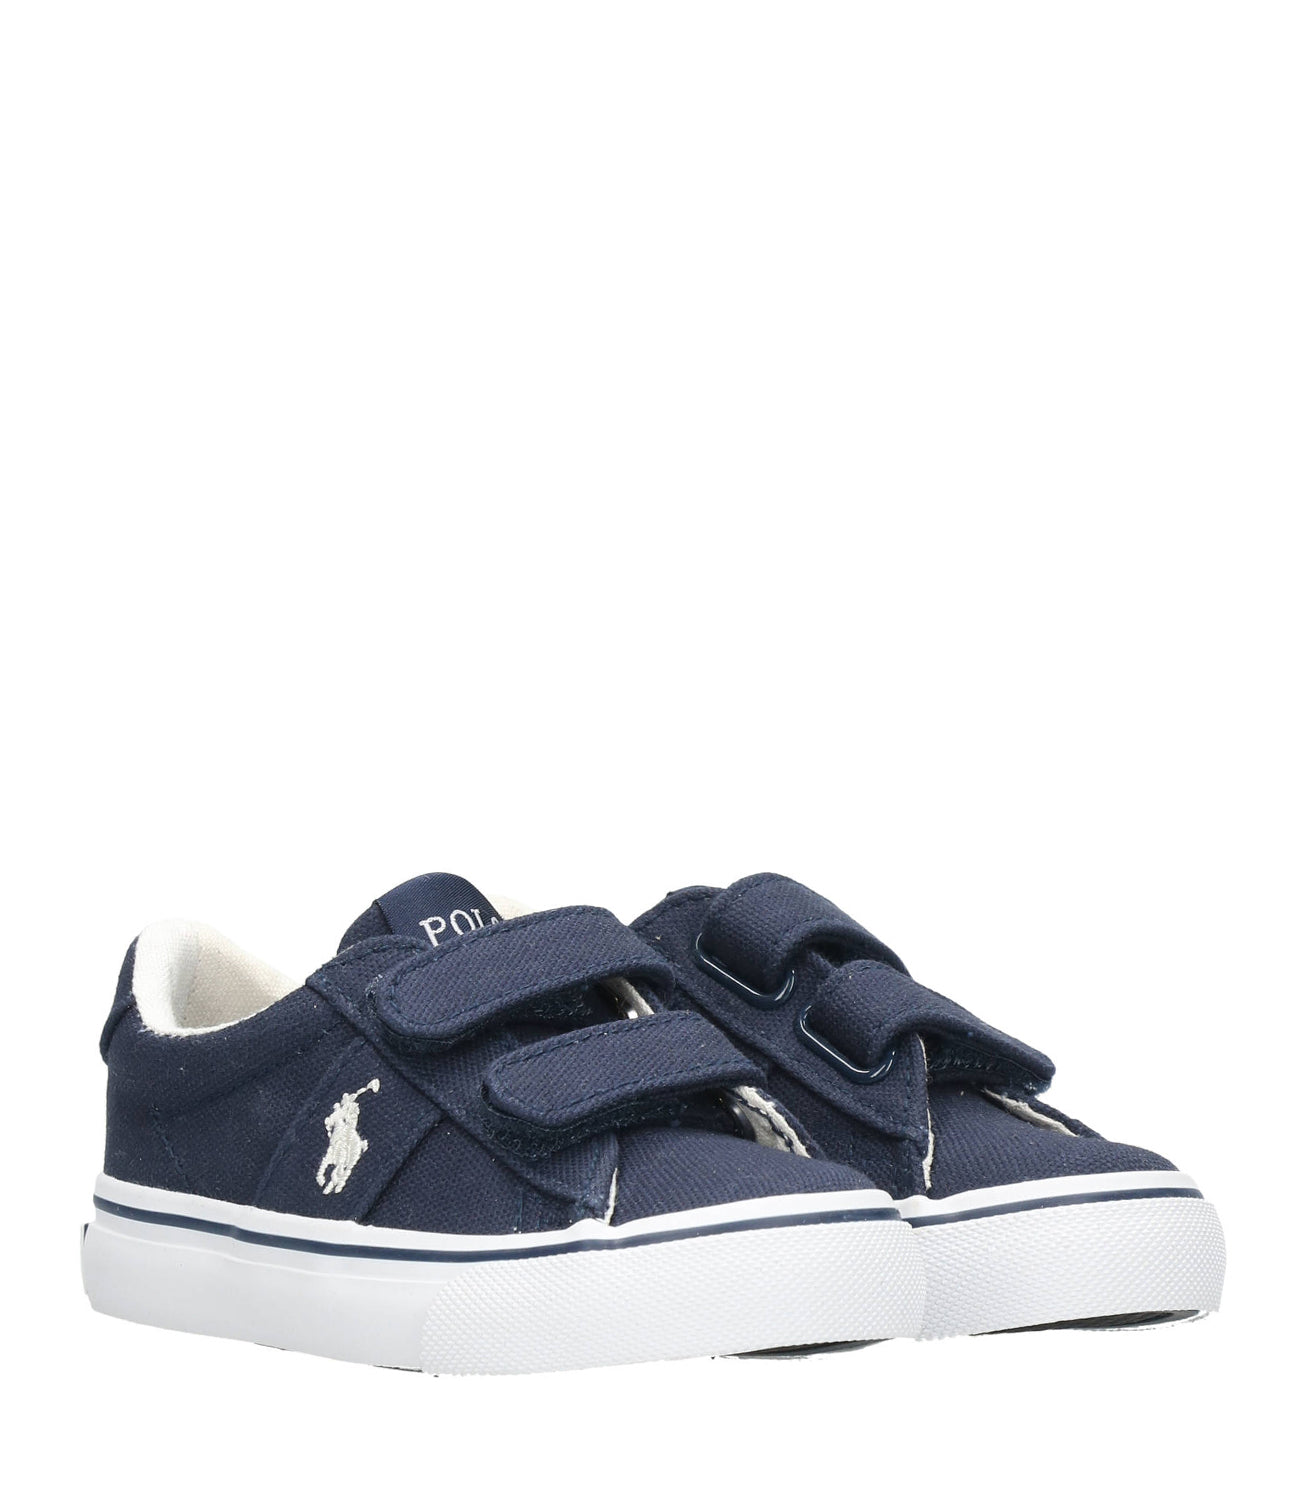 Ralph Lauren Childrenswear | Sneakers Navy Blue and White